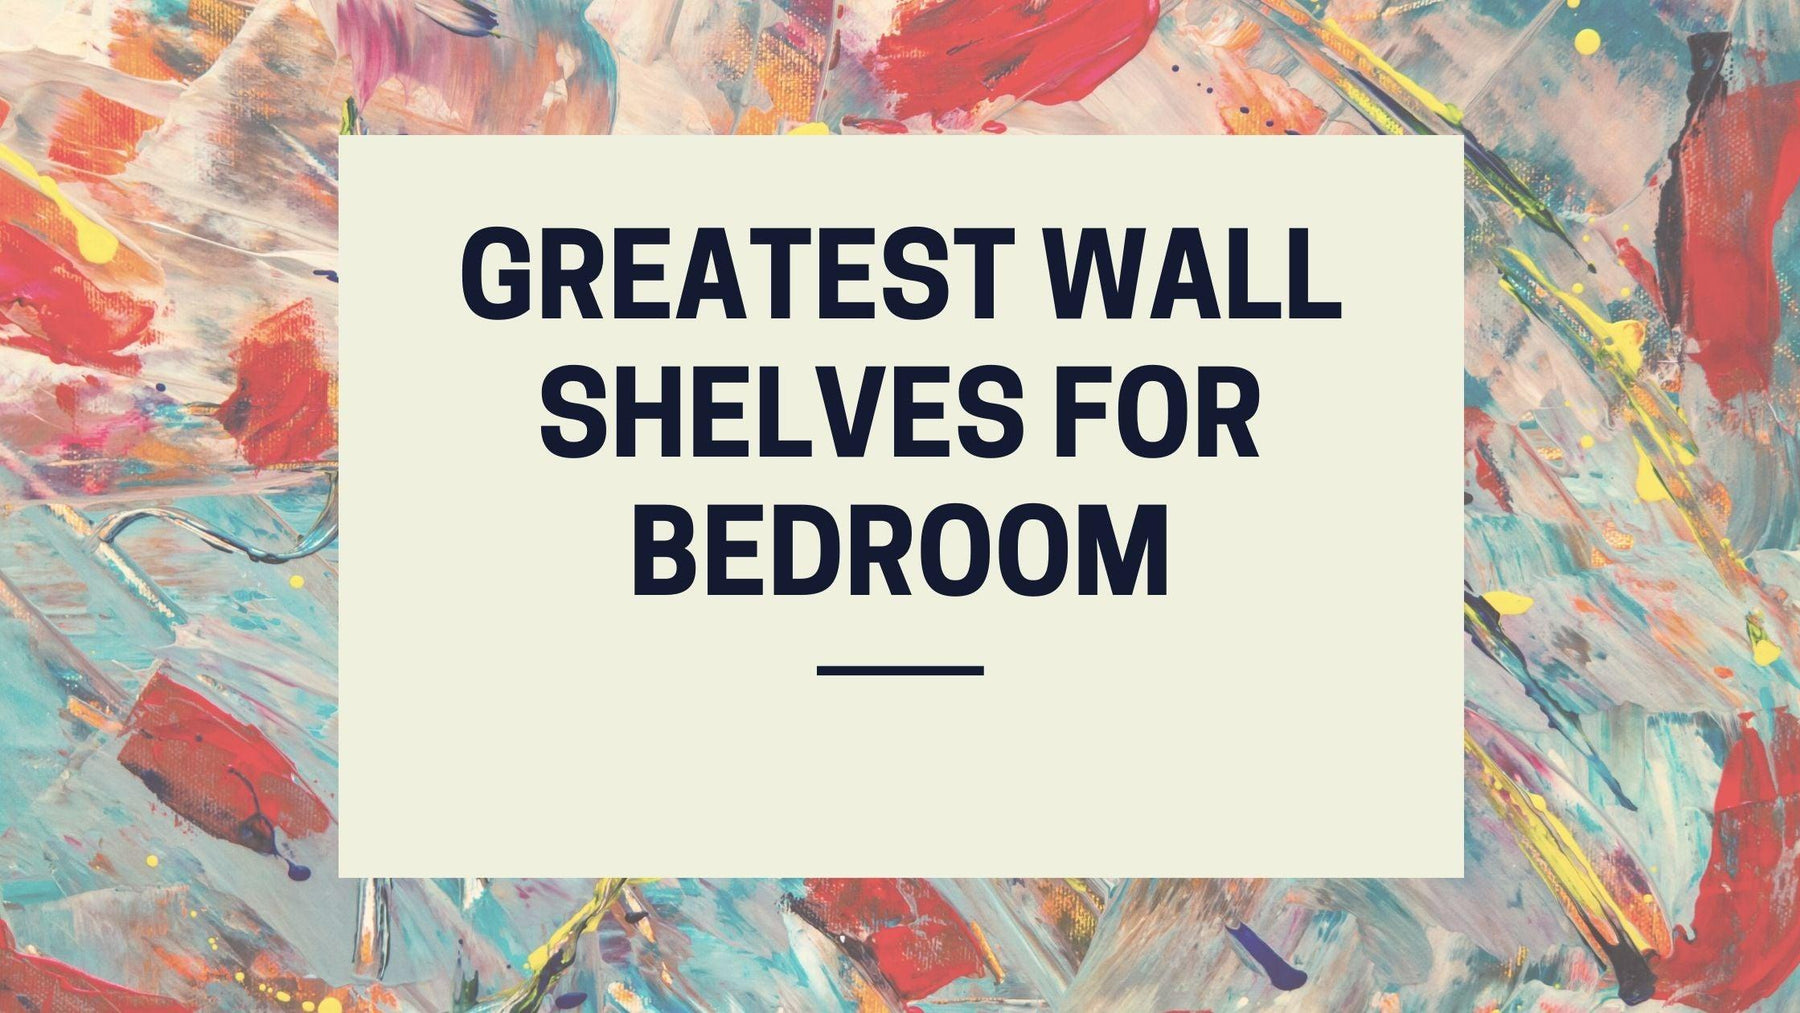 Greatest Wall Shelves for Bedroom - WoodenTwist